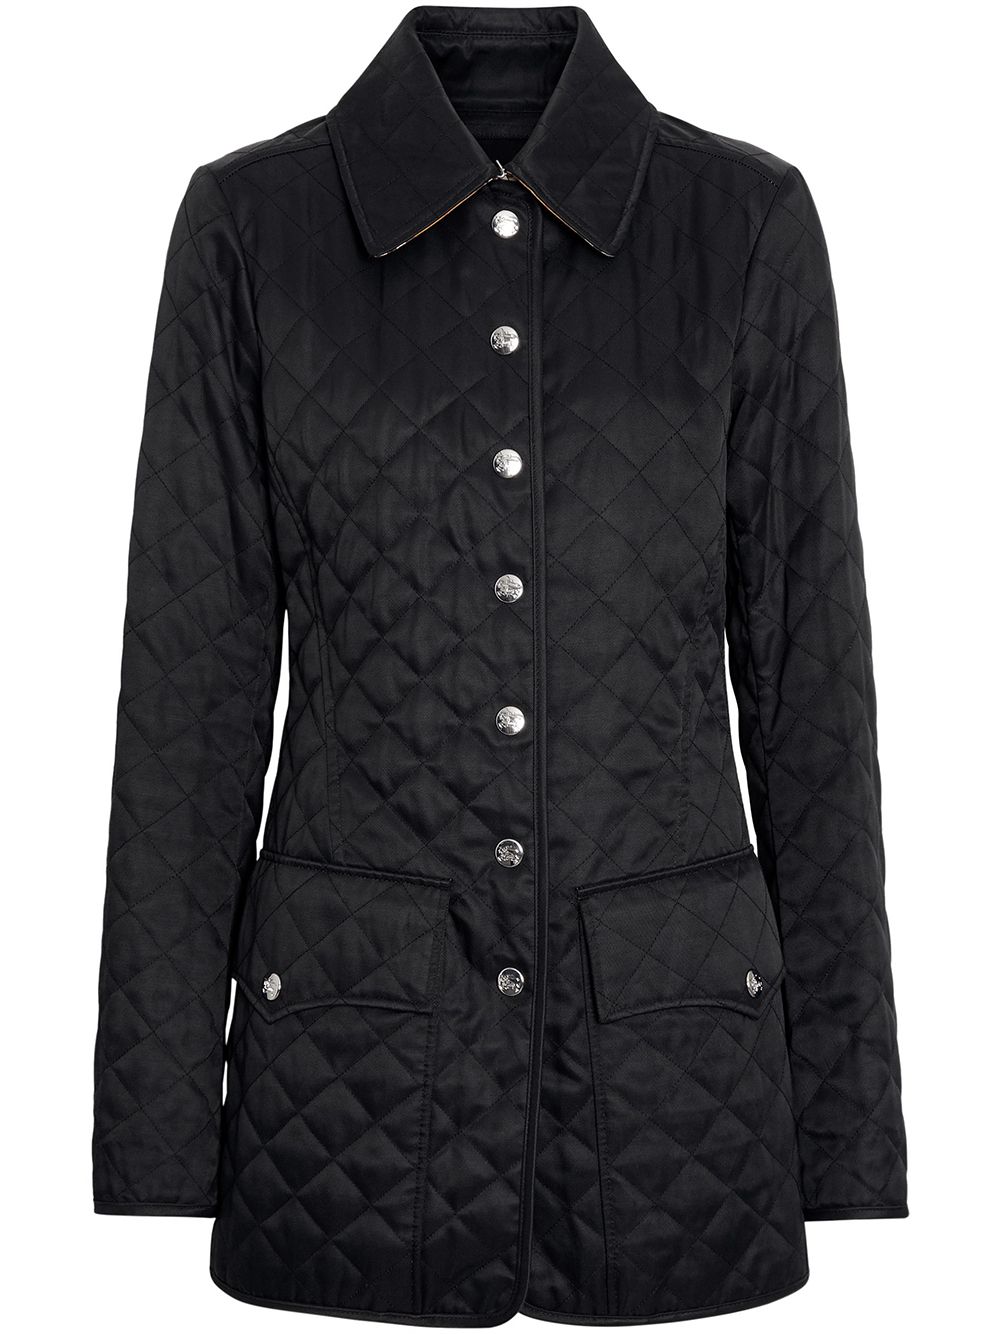 Burberry Logo Button Diamond Quilted Jacket - Farfetch